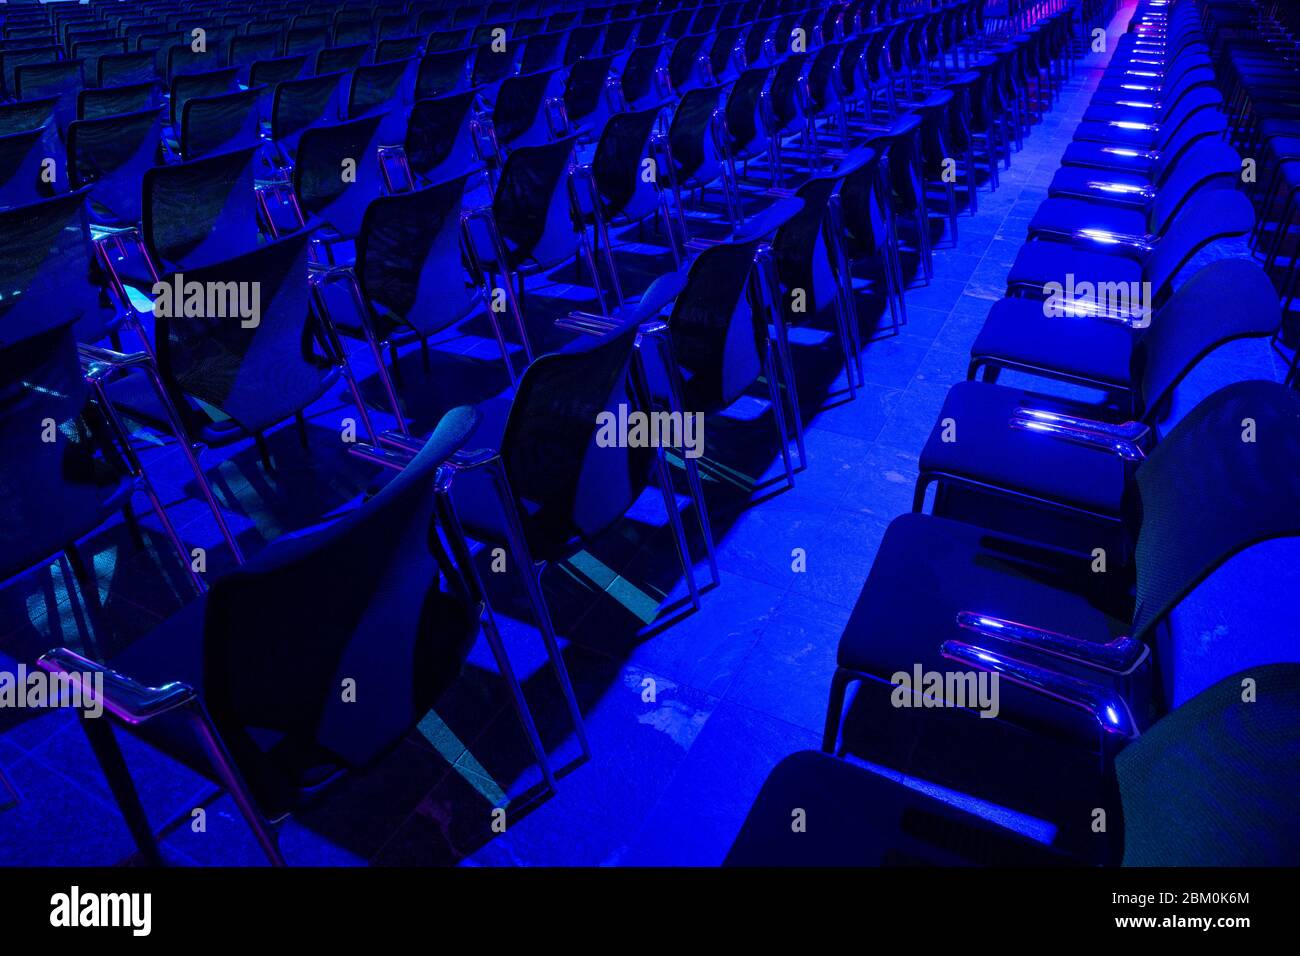 Blue chairs in the congress hall Stock Photo